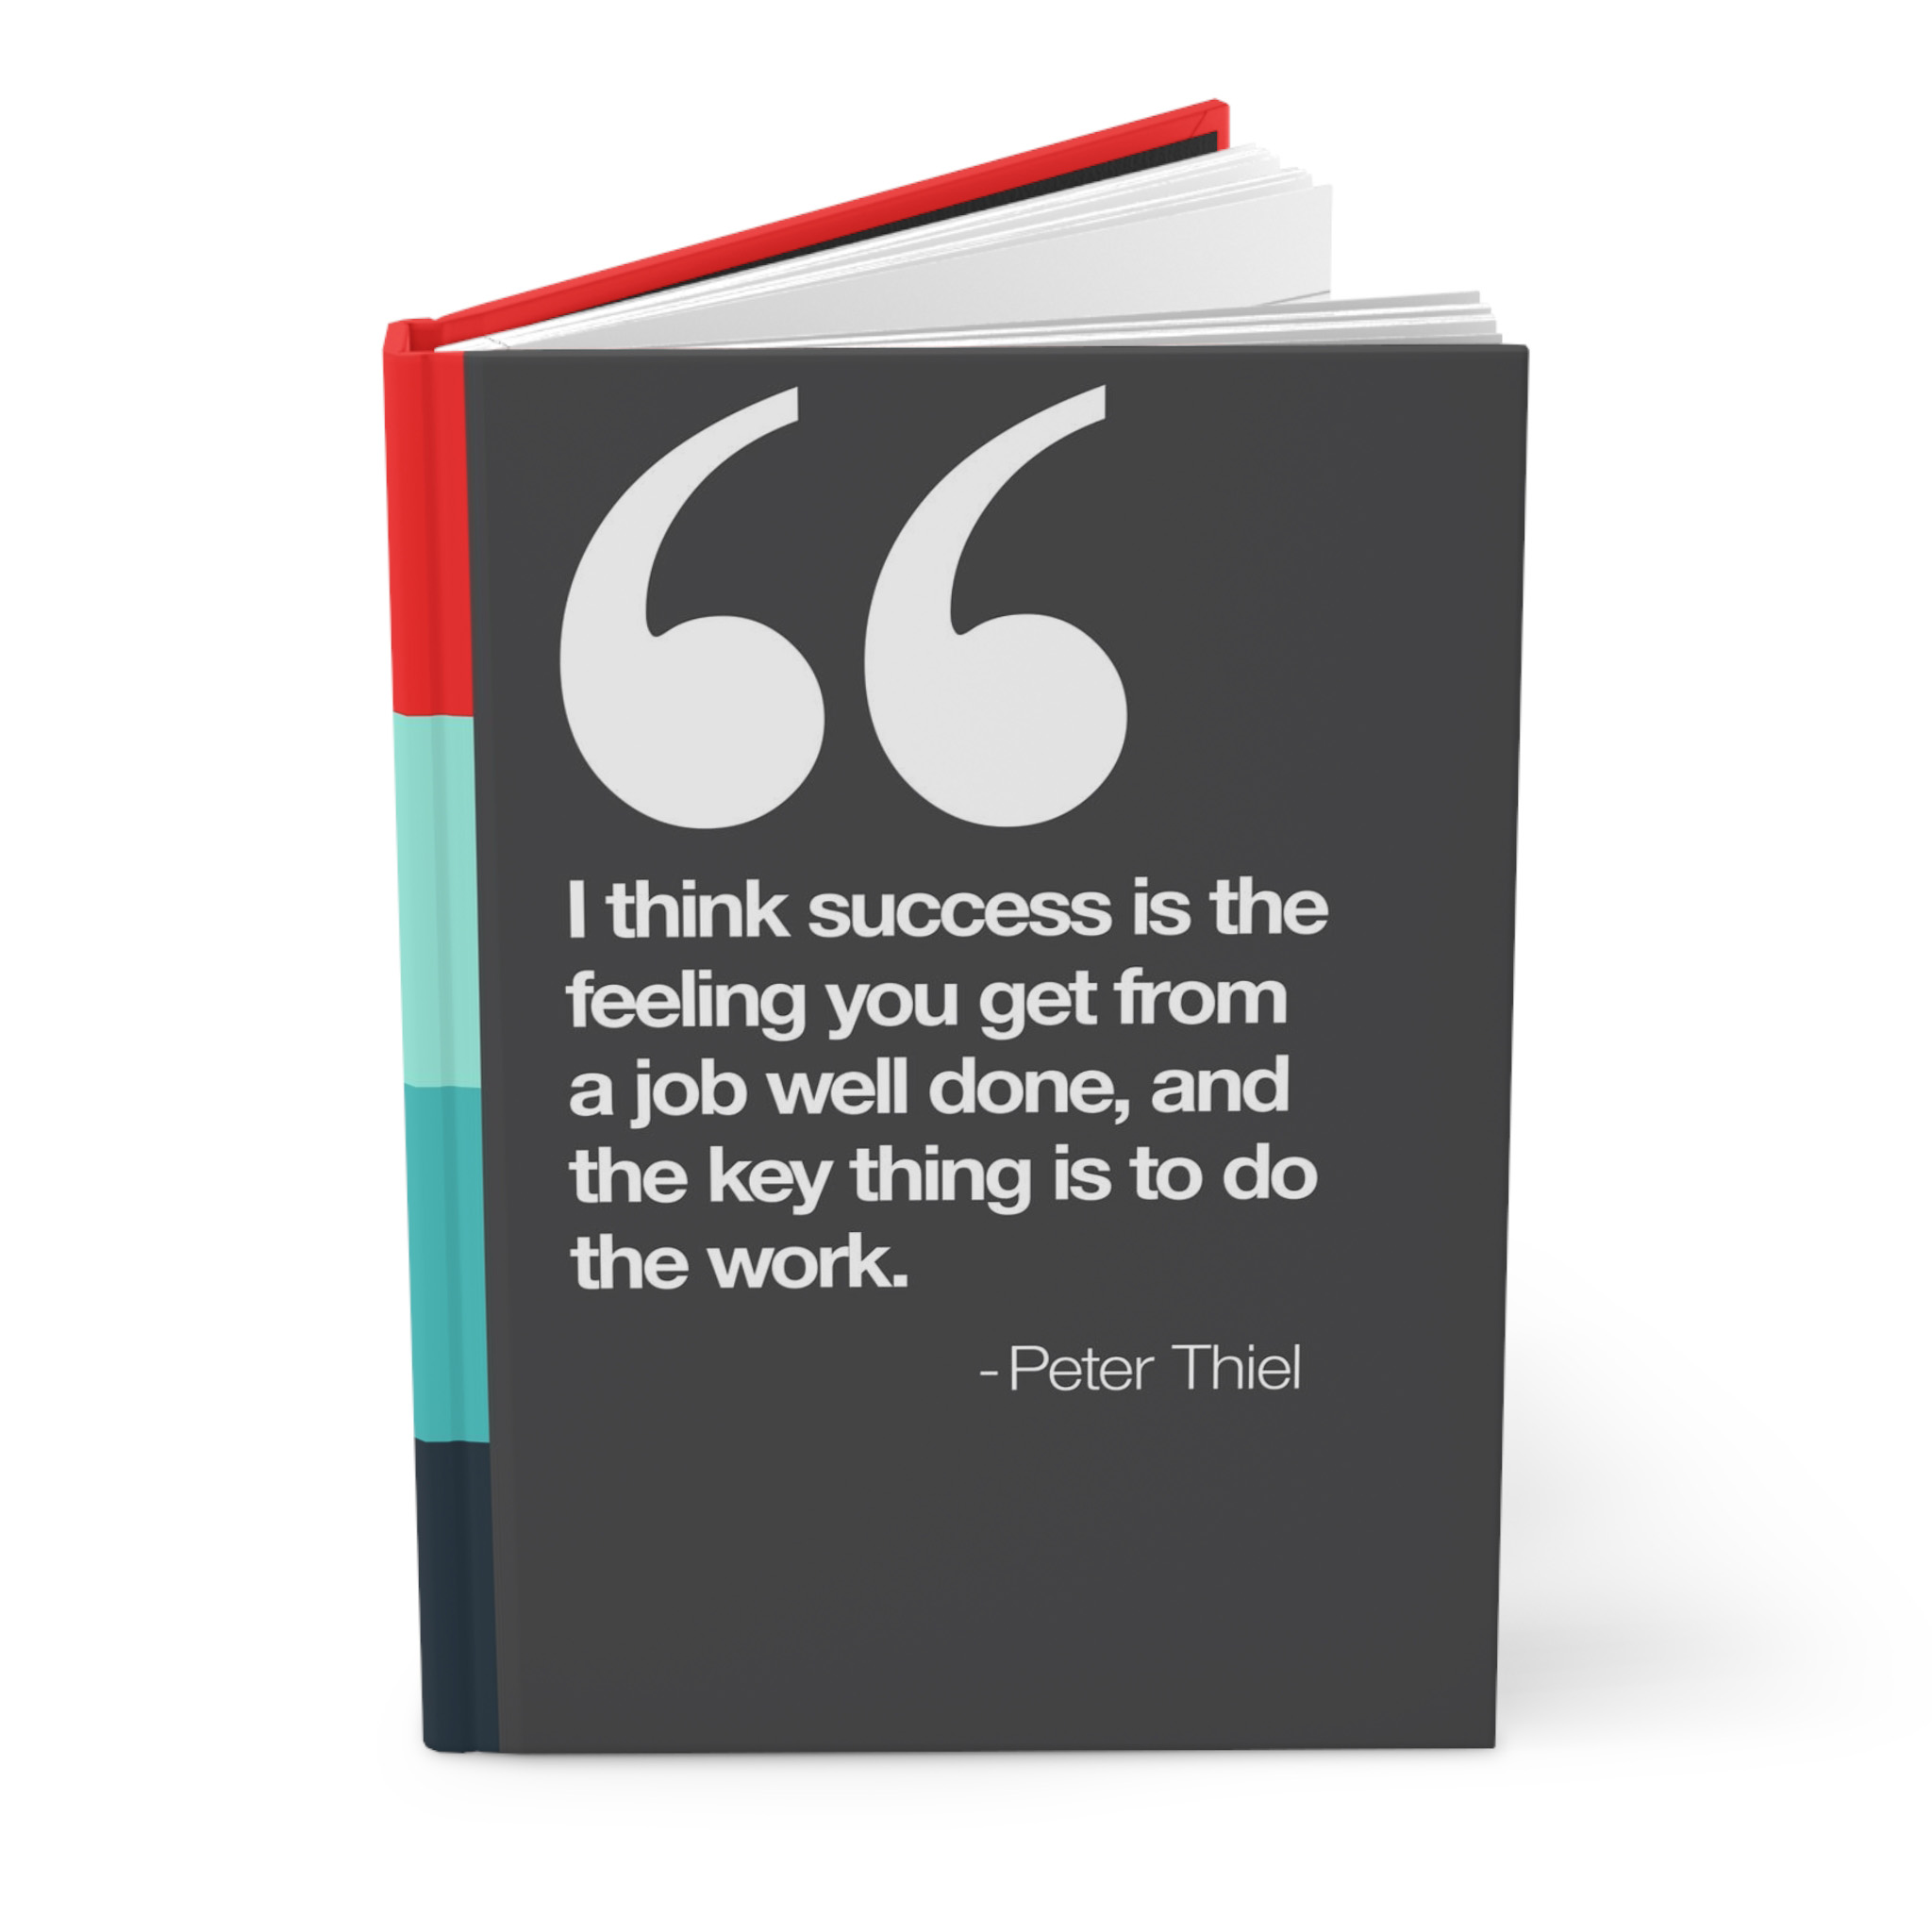 Do The Work - Peter Thiel Quote